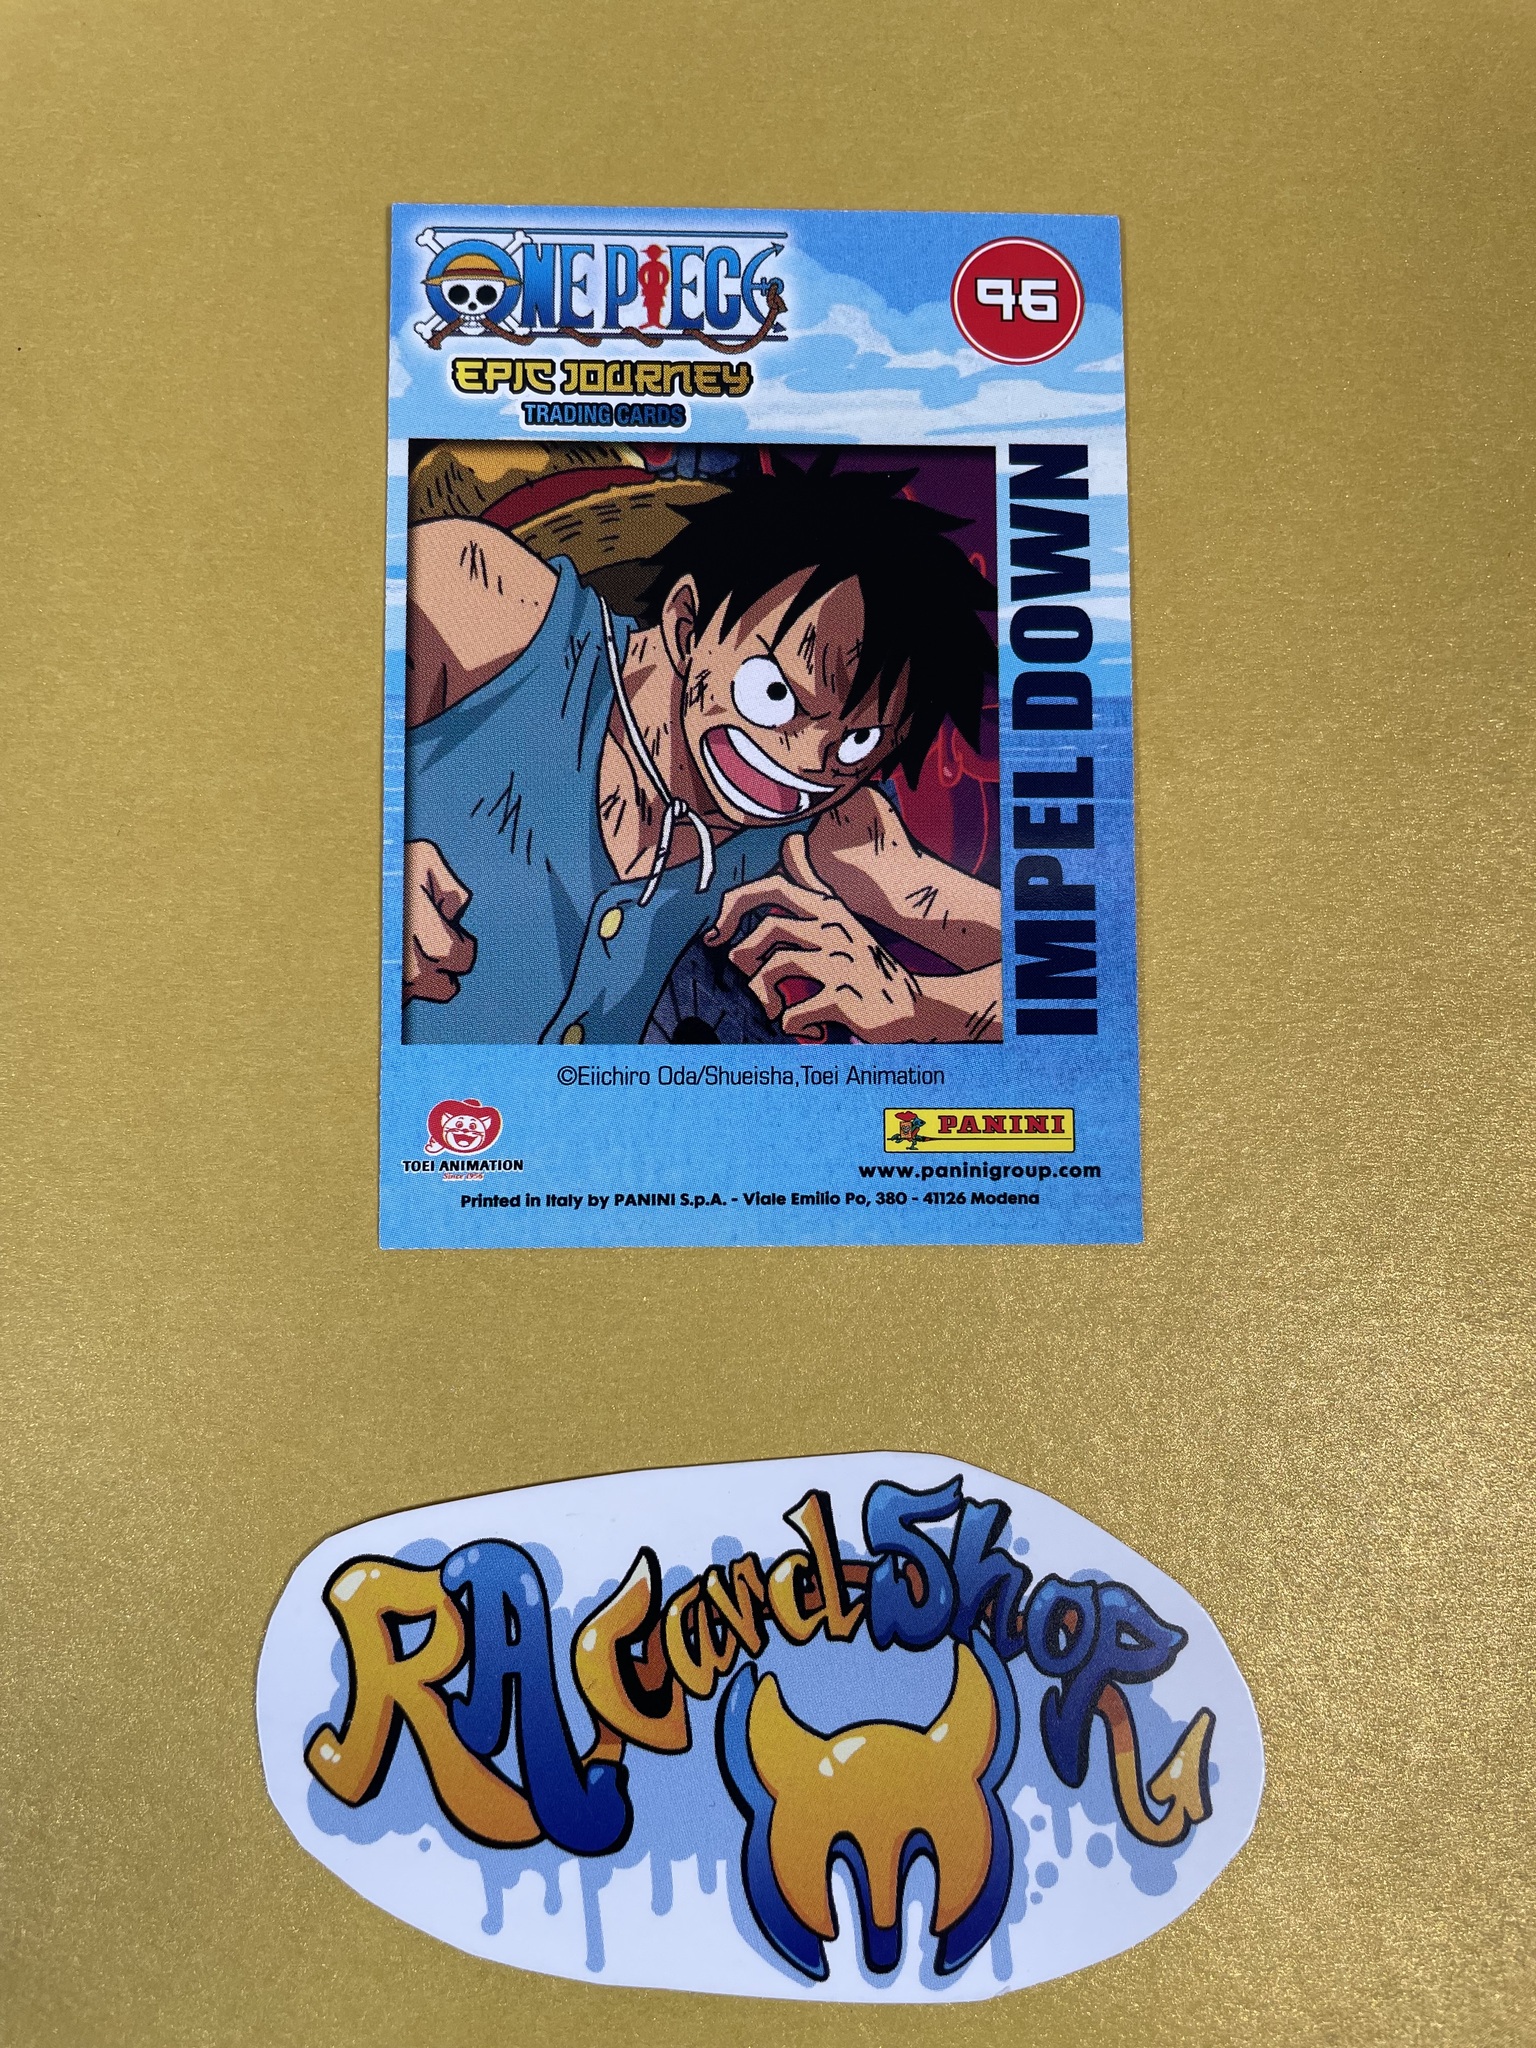 Impel Down Epic Journey 96 Trading Cards Panini One Piece